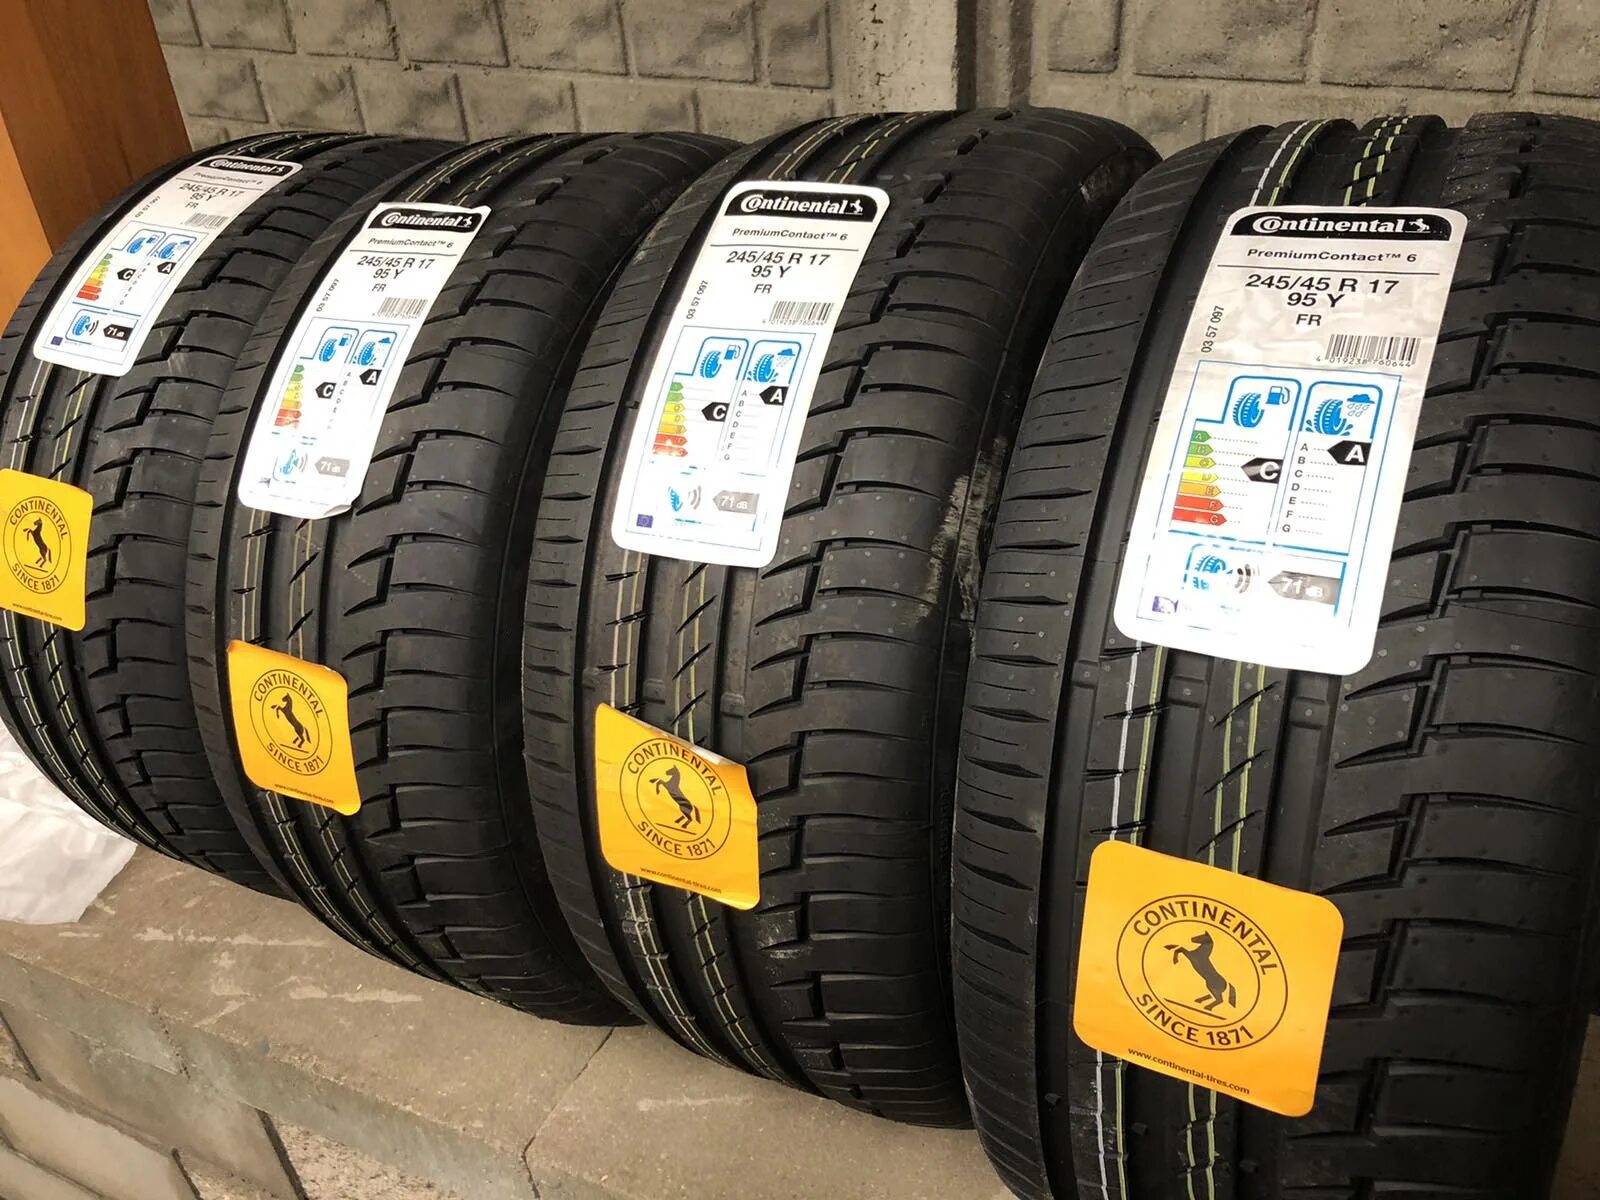 Continental PREMIUMCONTACT 6 225/55 r18. Continental PREMIUMCONTACT 6 235/45 r17. Continental CONTIPREMIUMCONTACT 6 225/55 r18.